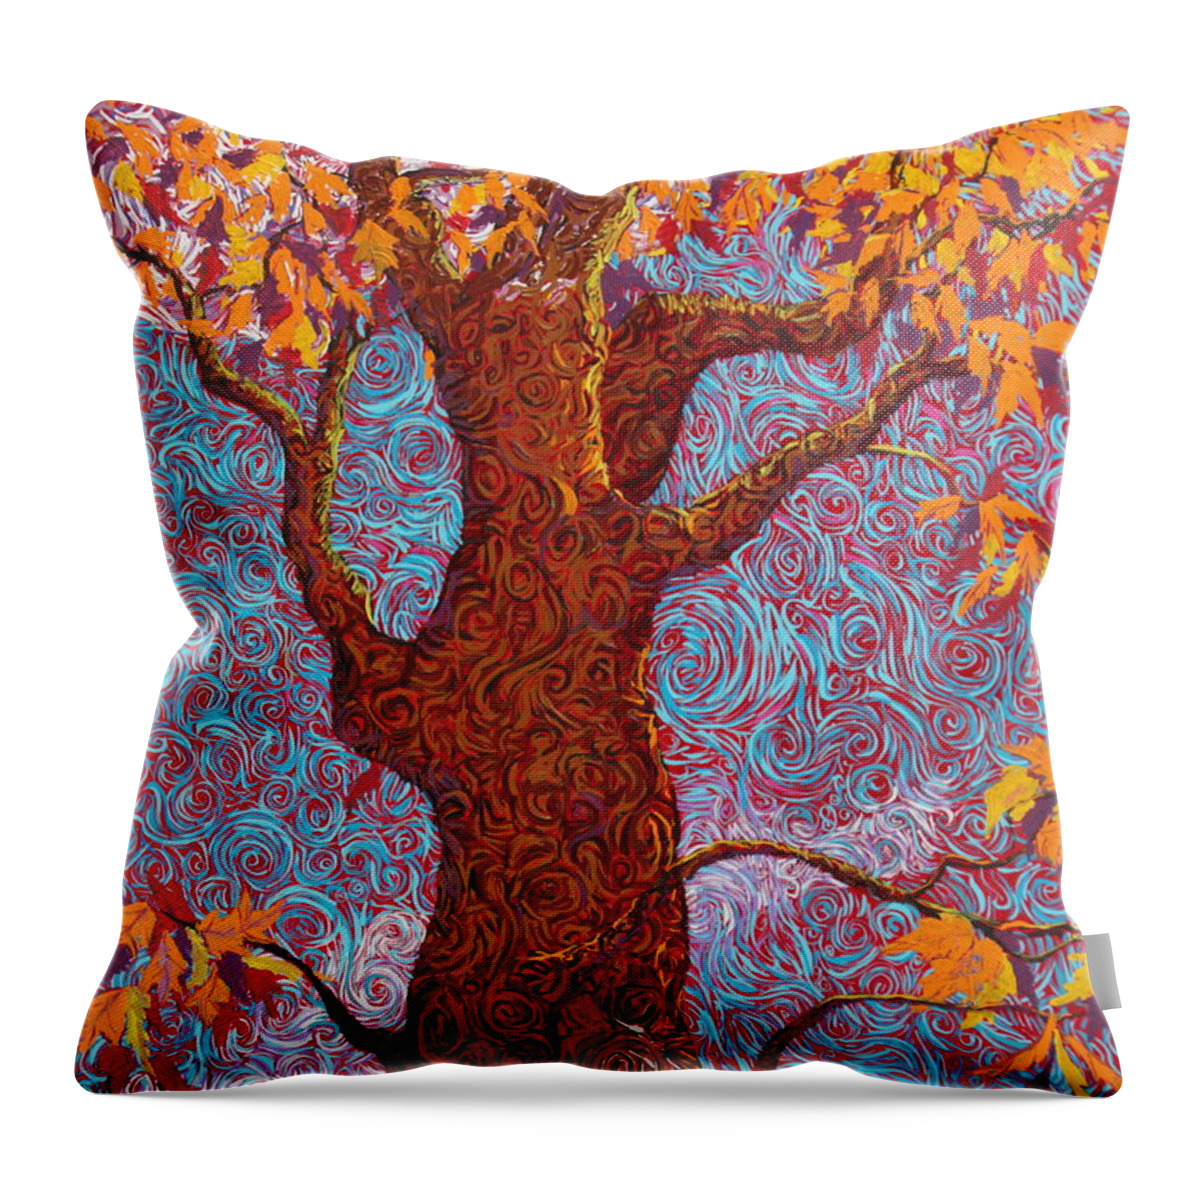 Squigglism Throw Pillow featuring the painting Taking The Light by Stefan Duncan